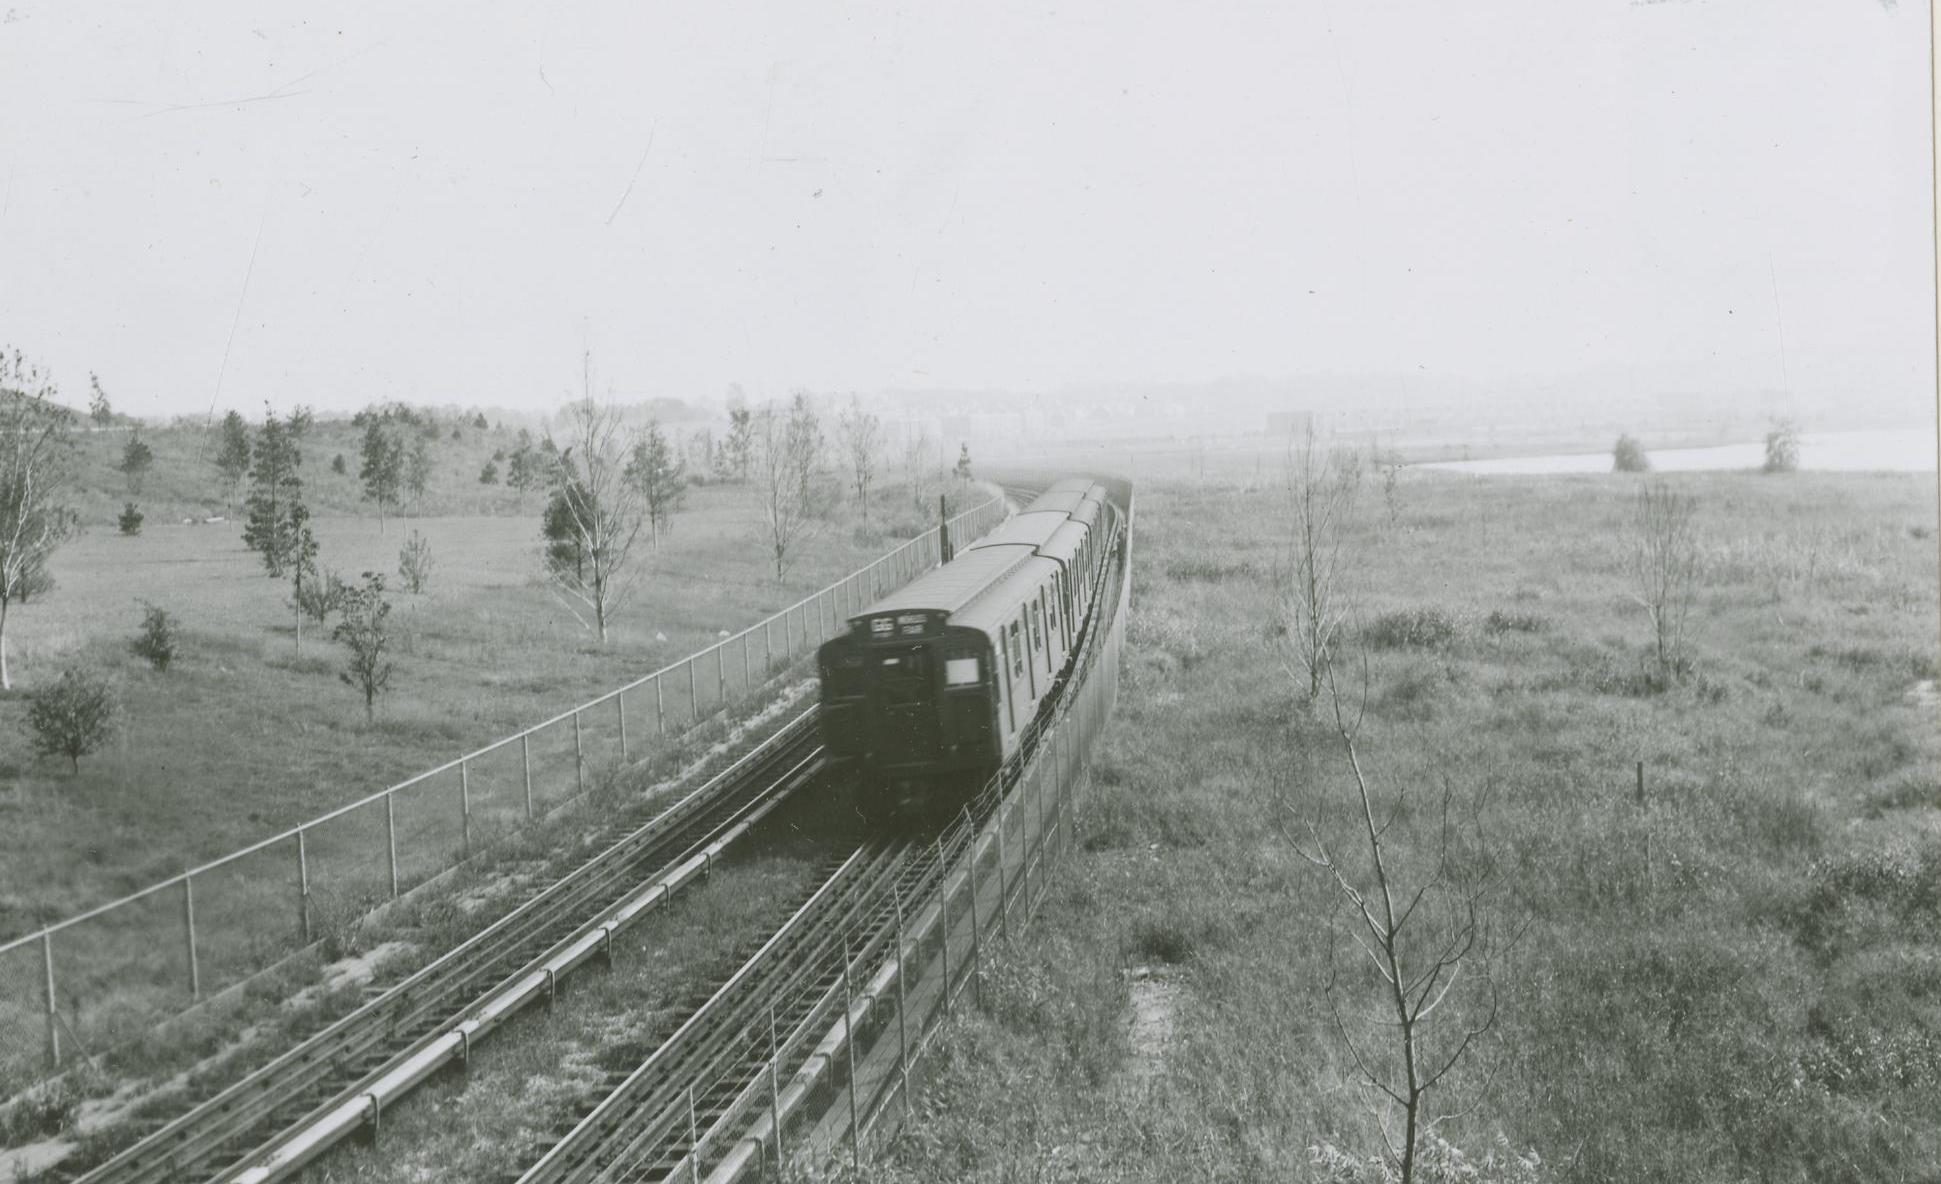 The World's Fair Railroad running through an area that is now the Van Wyck Expressway.